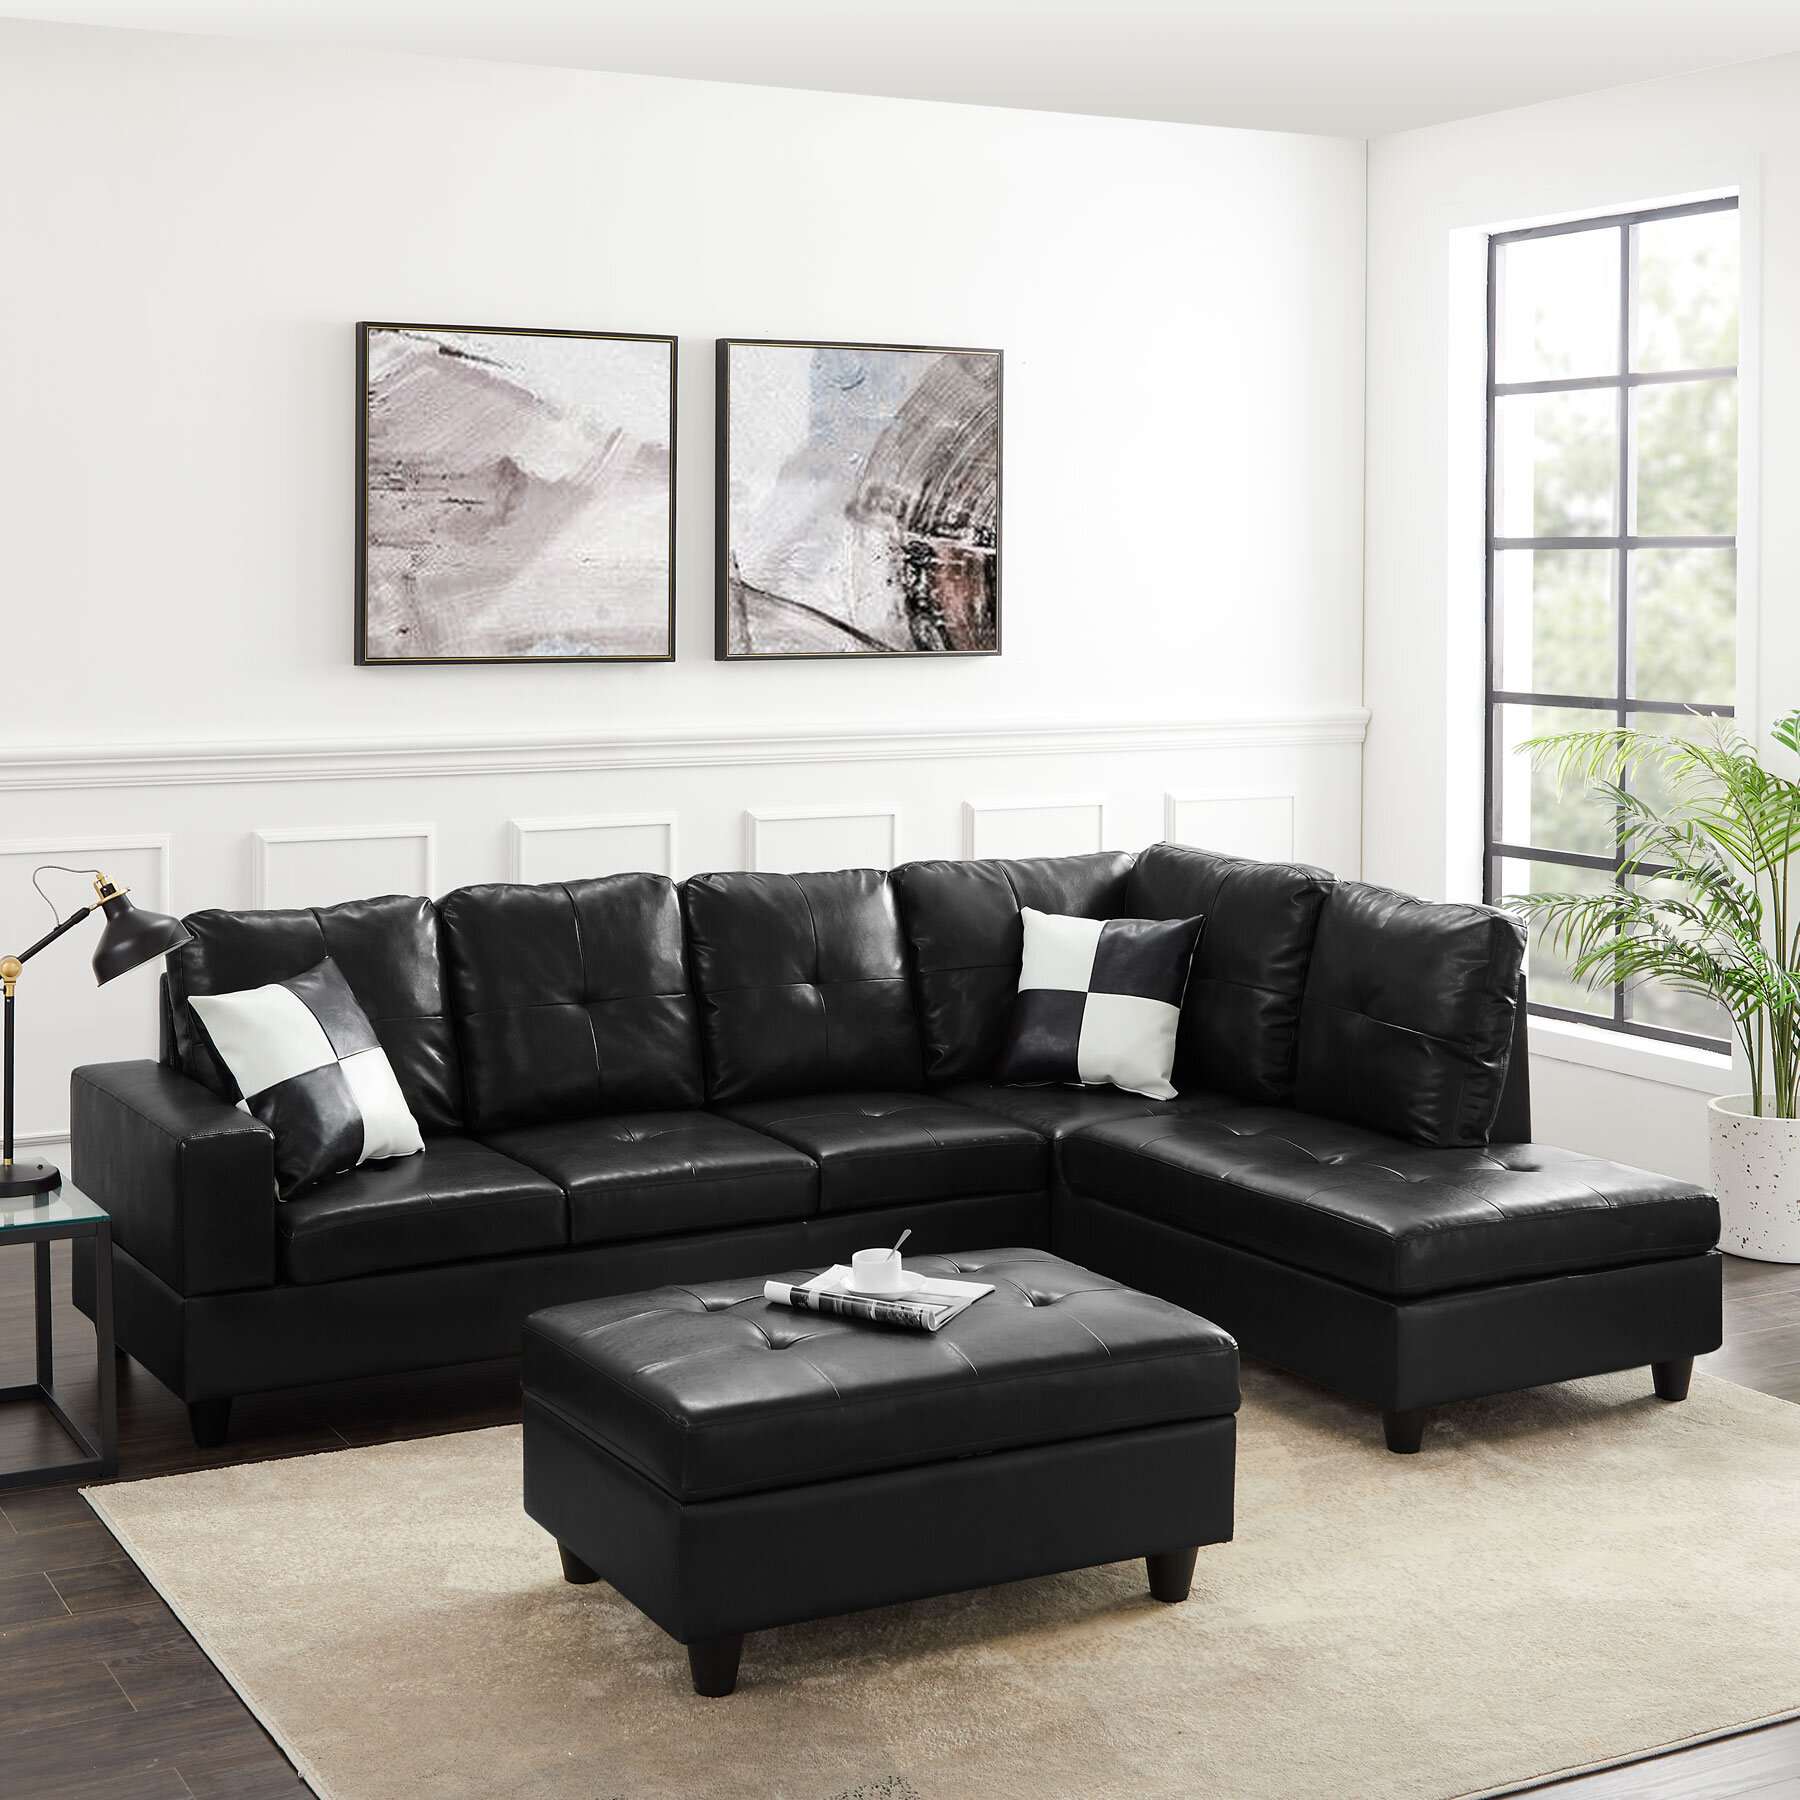 Featured image of post L Shaped Couch Coffee Table / For example, a heavy clunky overstuffed comfortable couch paired with a dainty coffee table found.